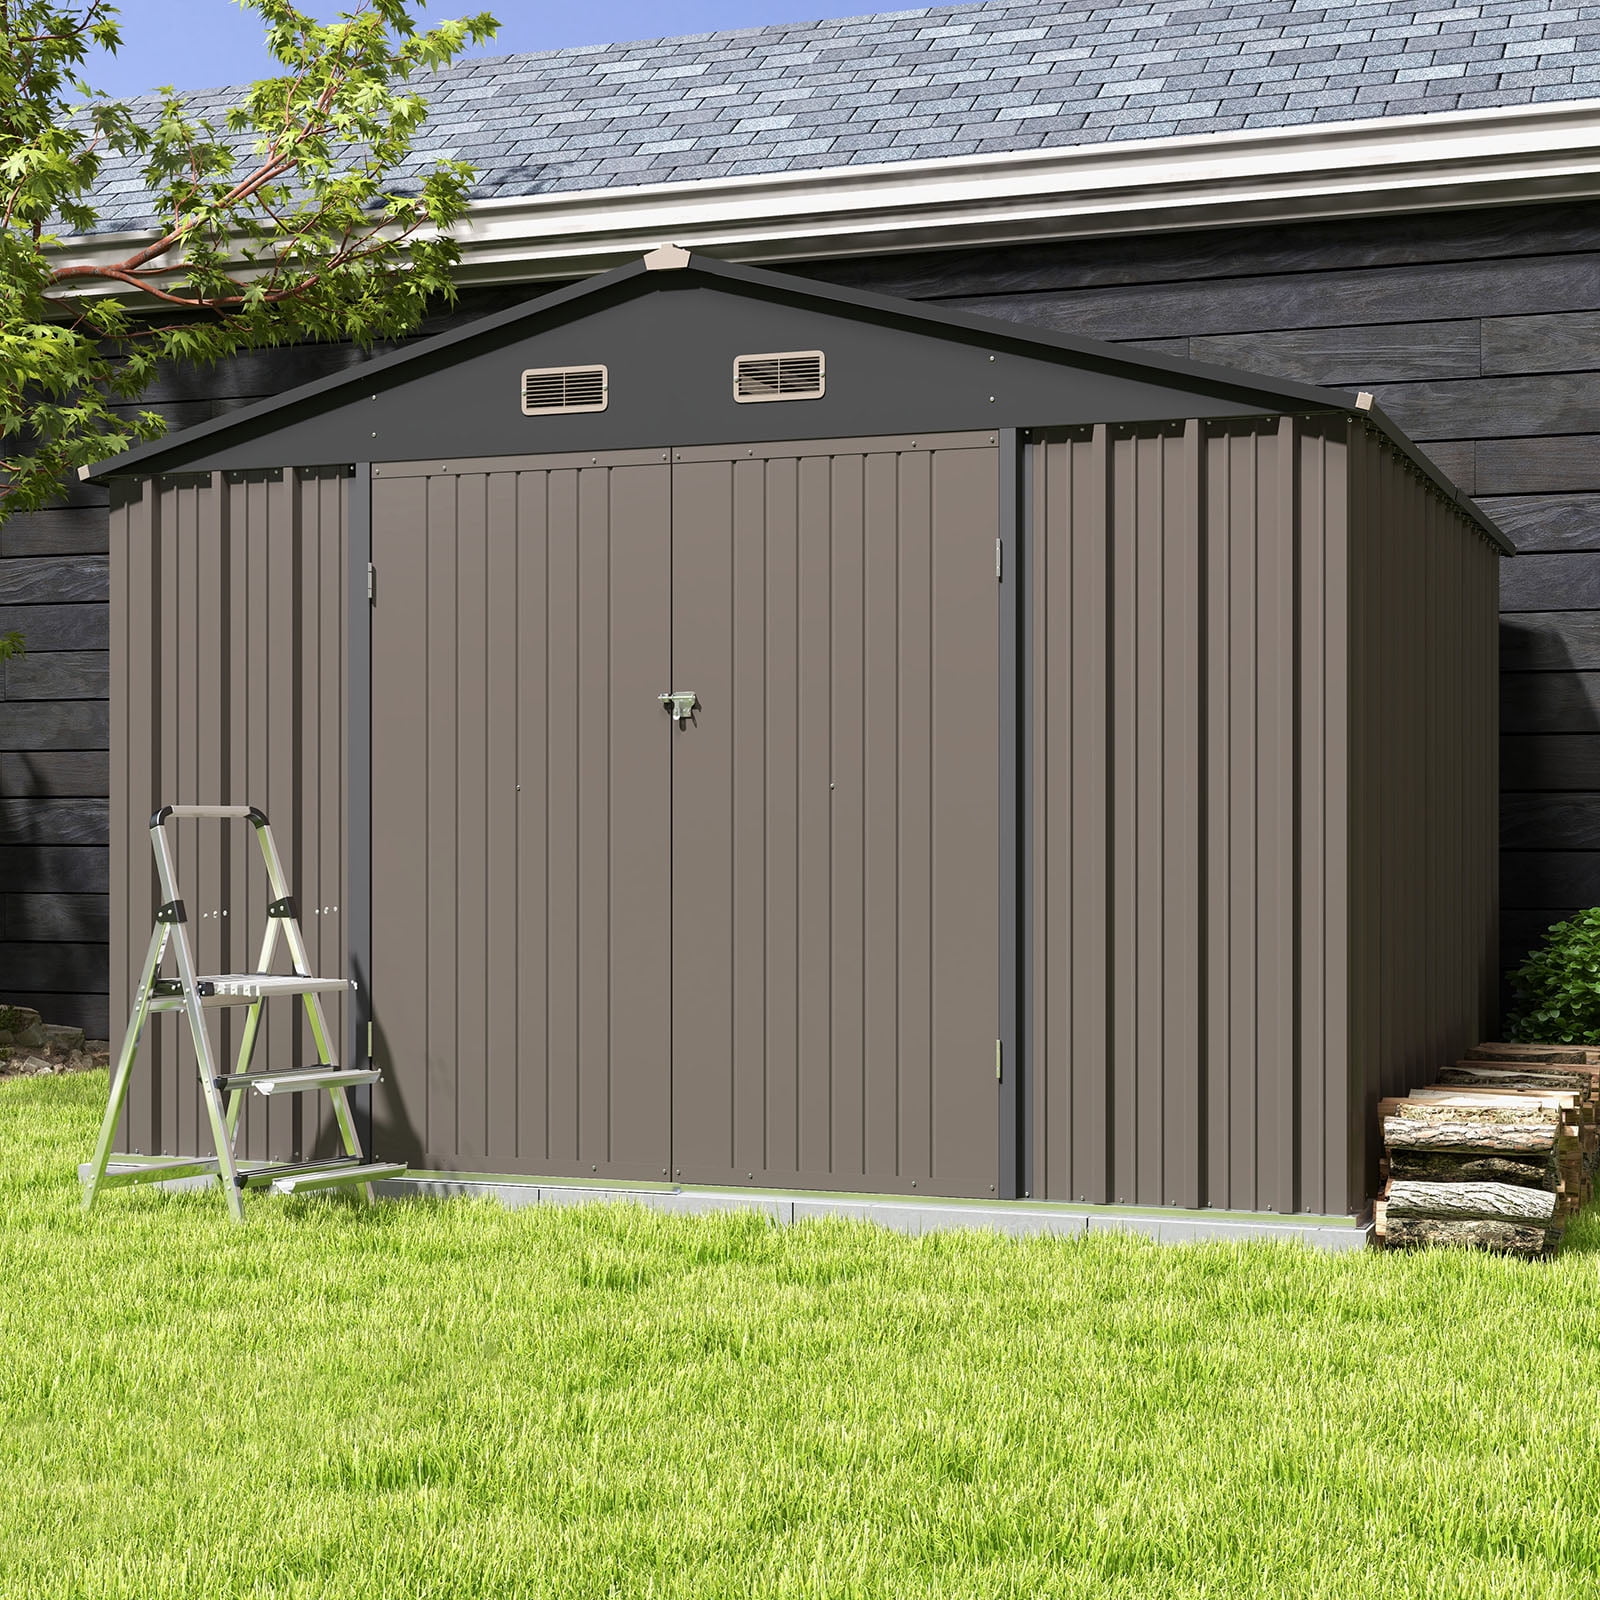 Patiowell 10 x 10 ft Outdoor Storage Metal Shed with Sloping Roof and Double Lockable Door